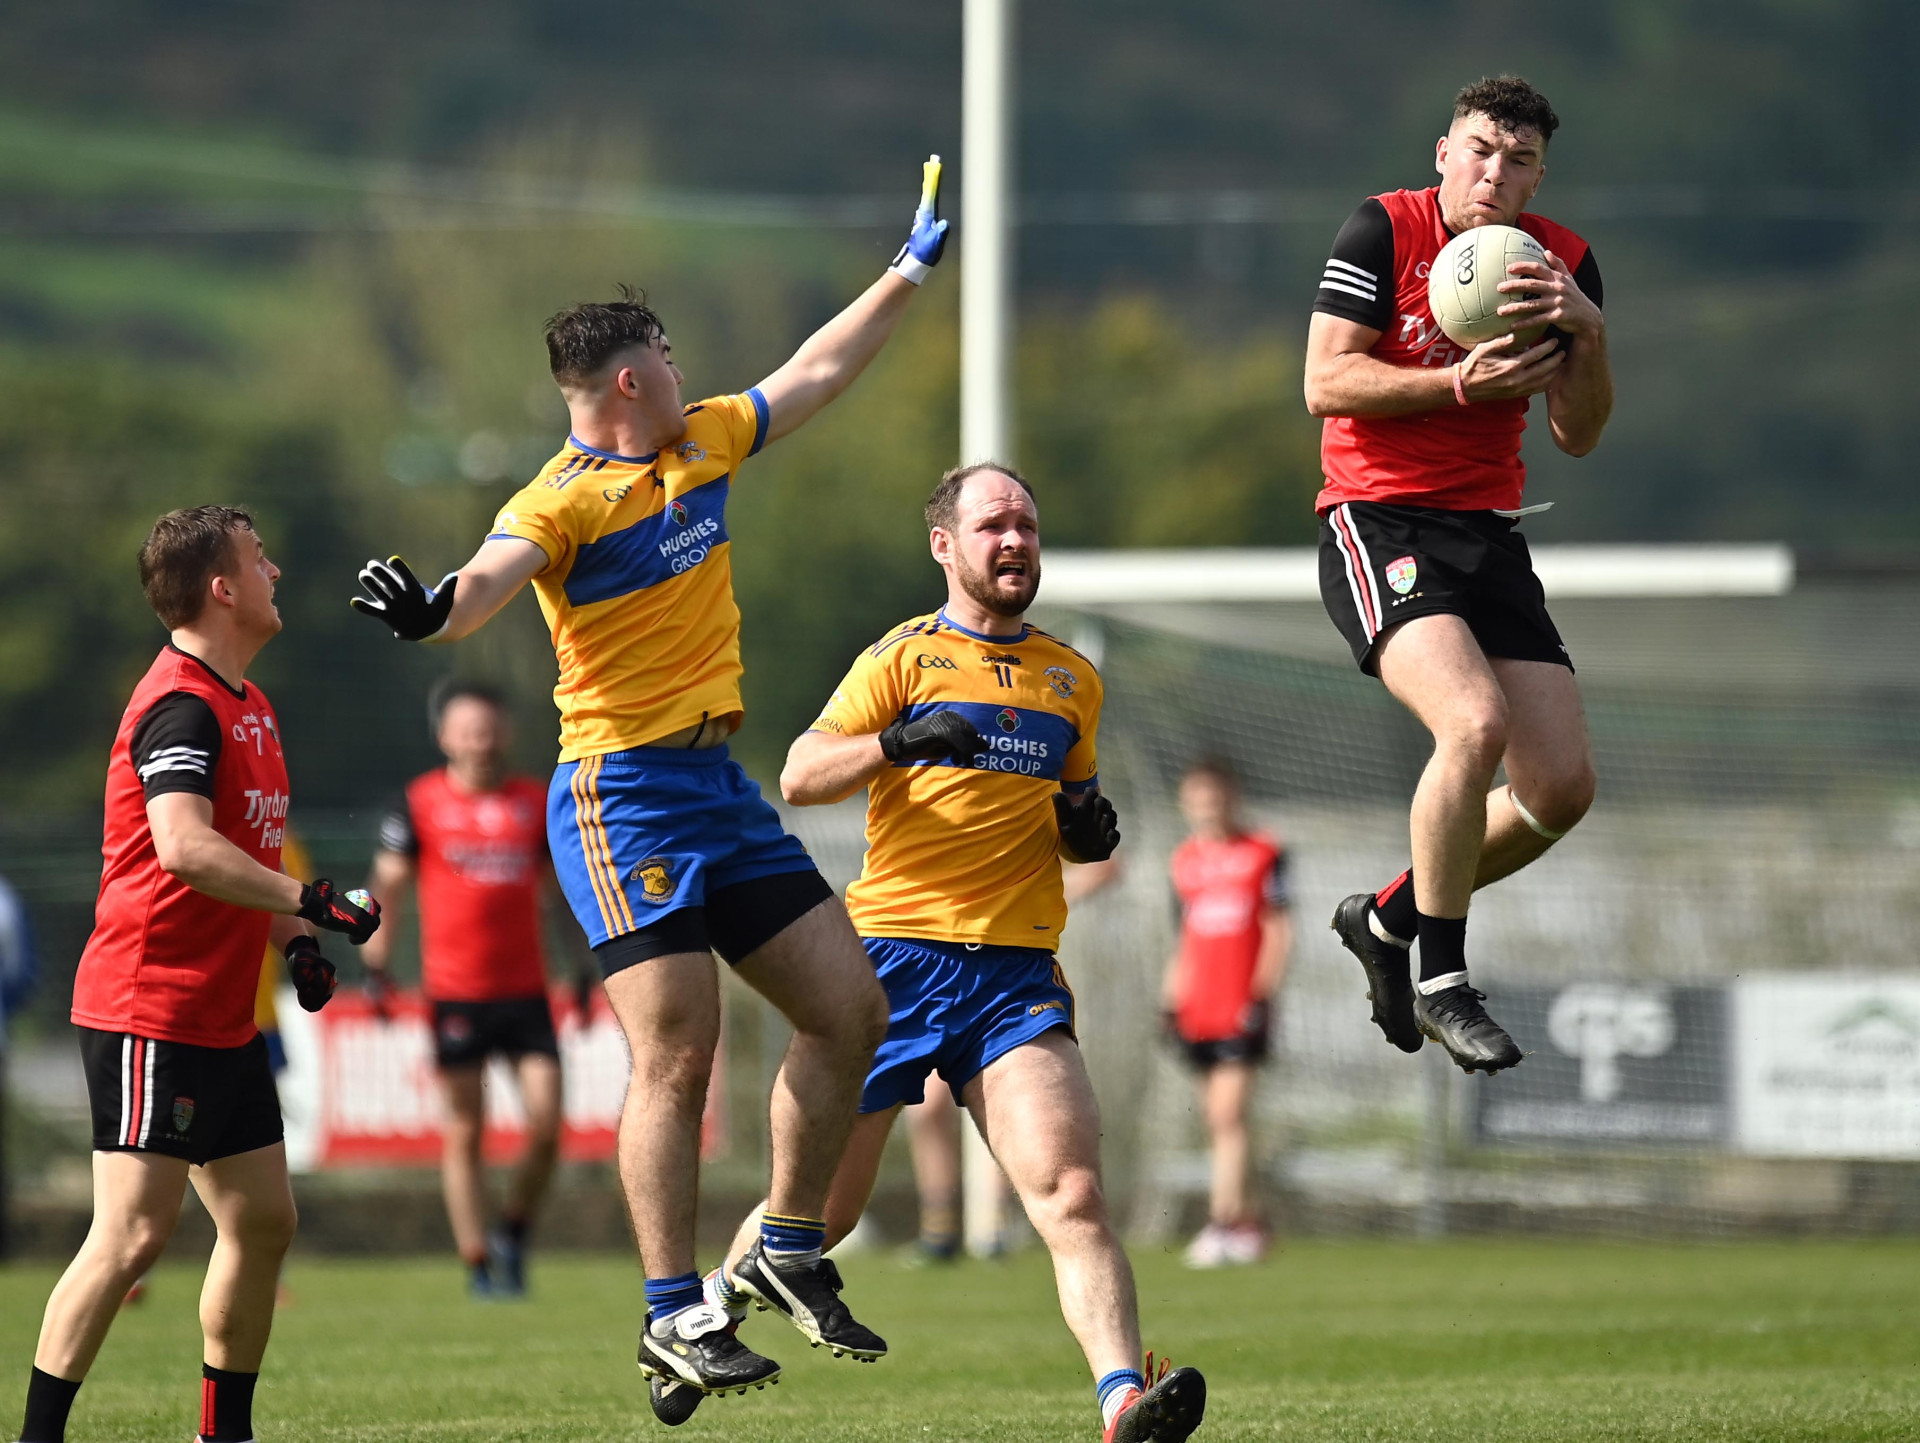 Too many sides struggling in Junior football -Monteith